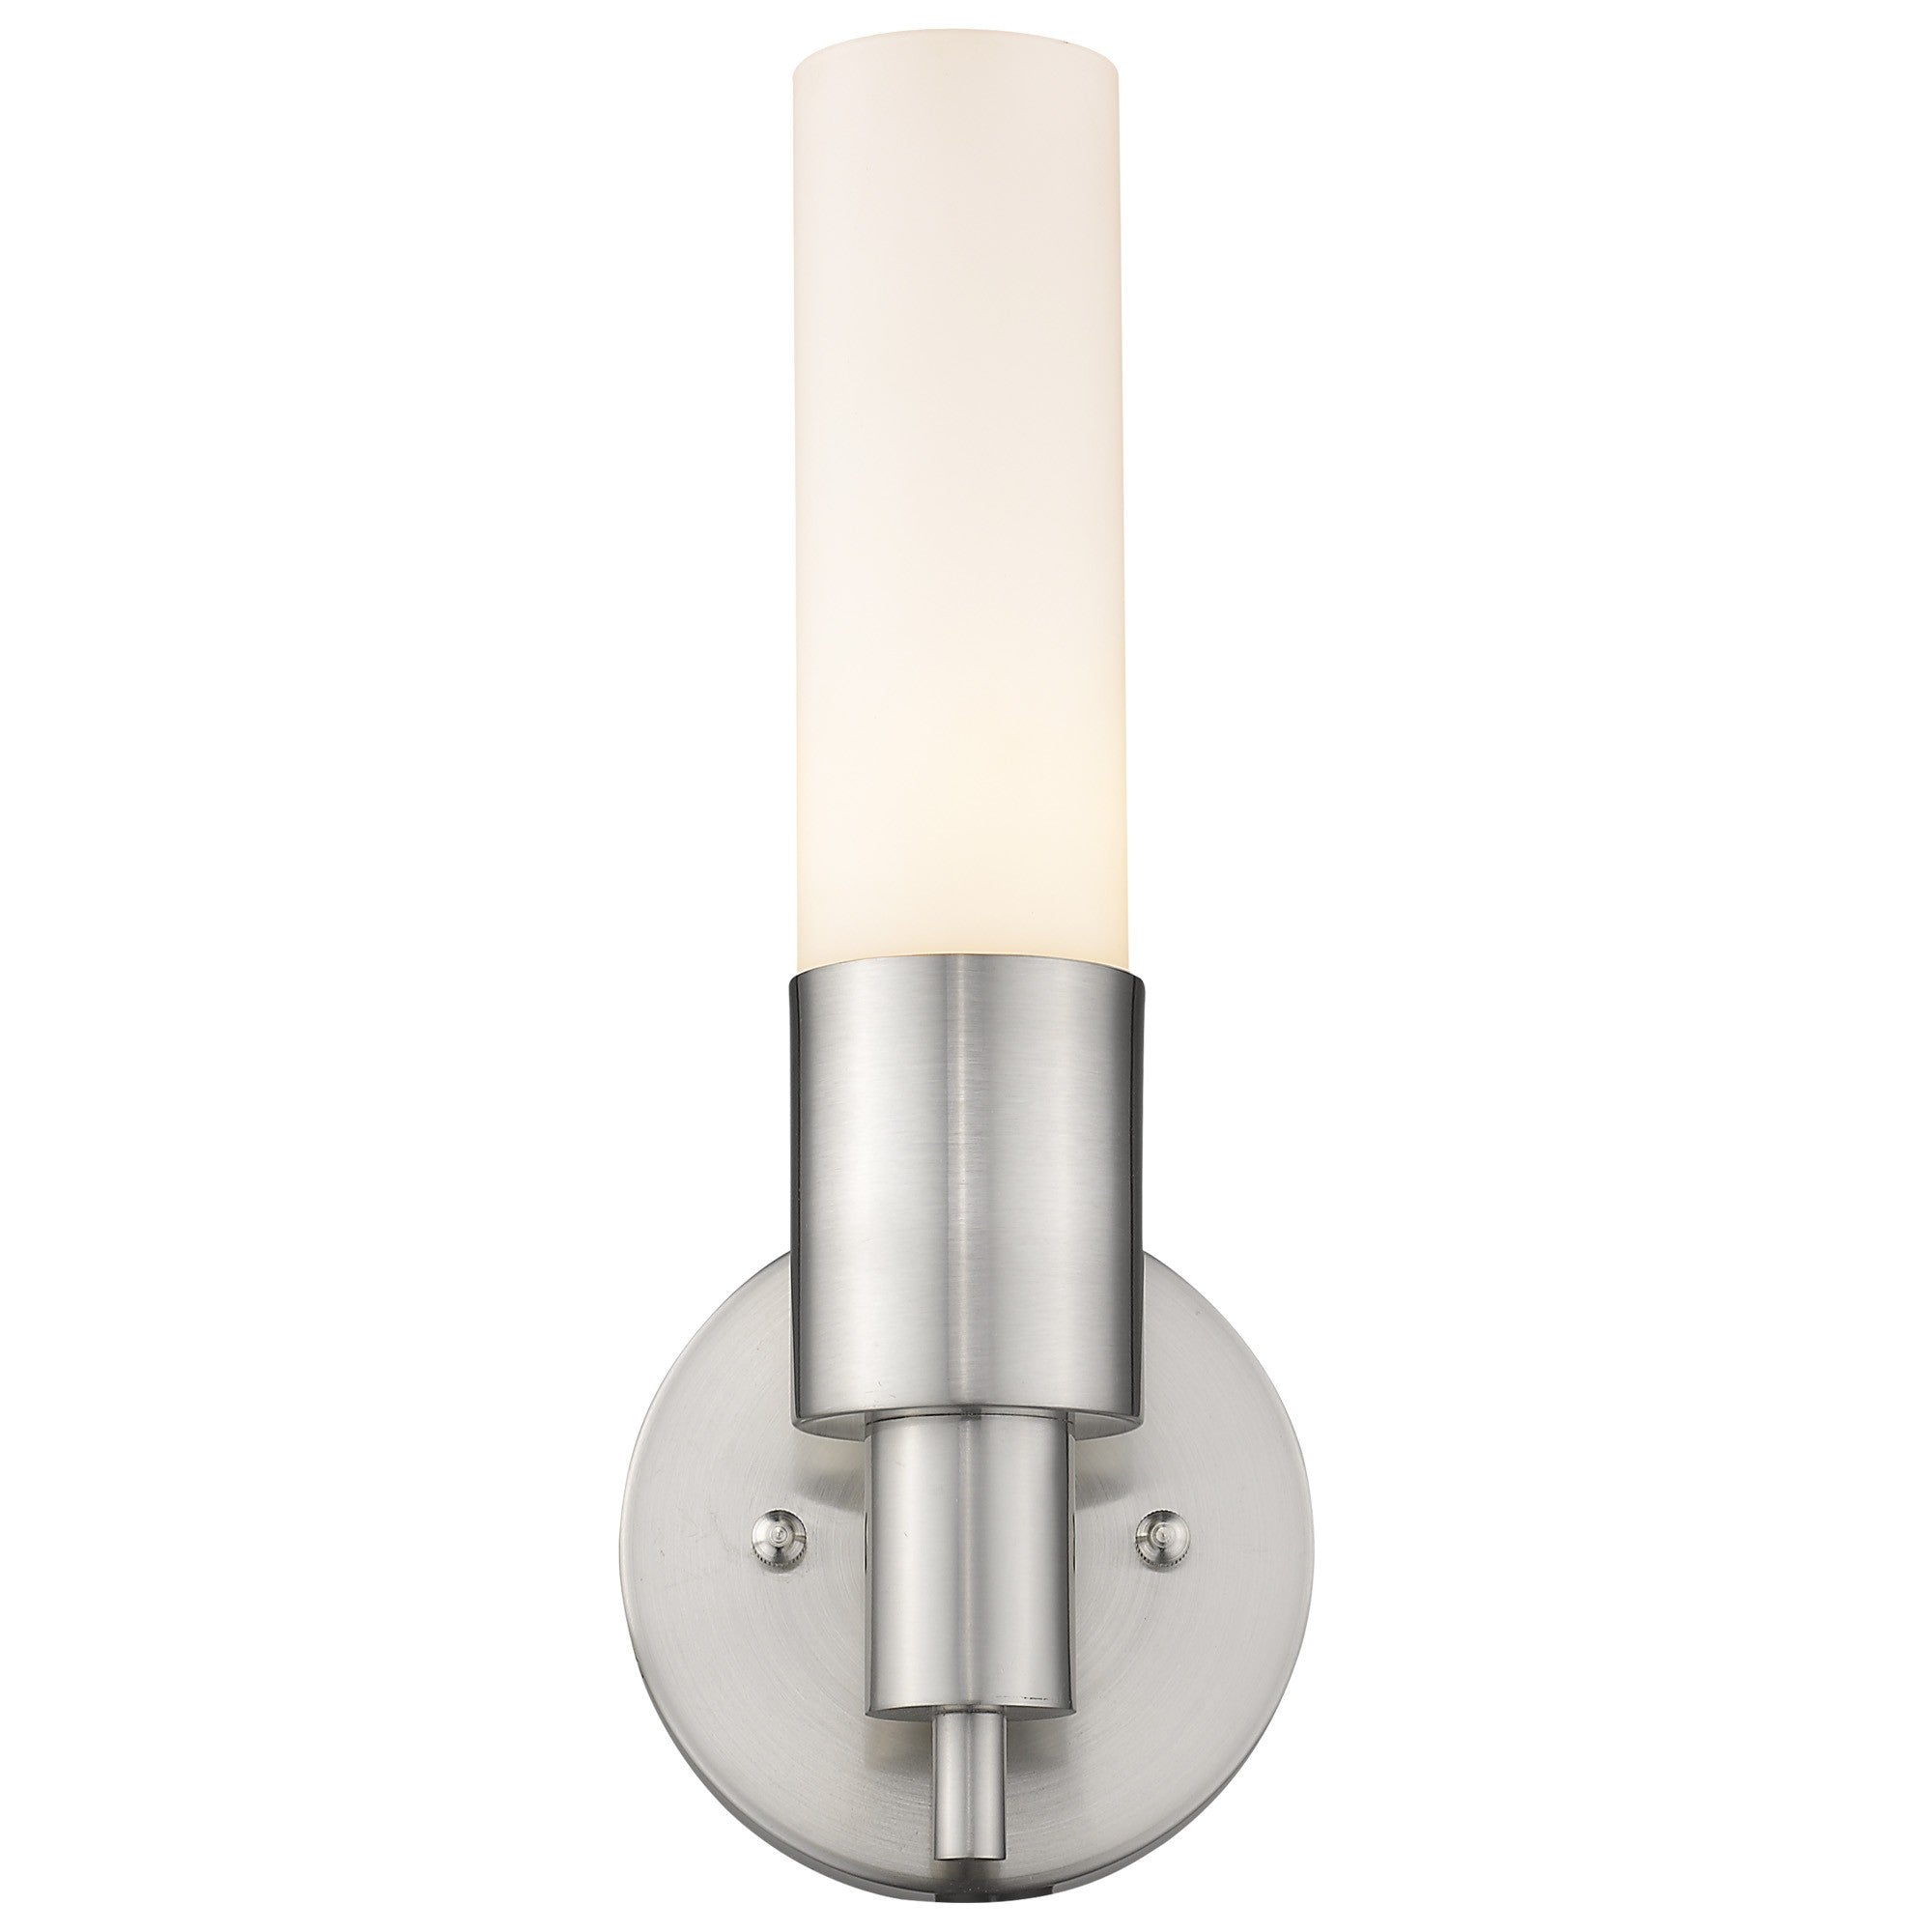 Silver Narrow Wall Light with Frosted Glass Shade